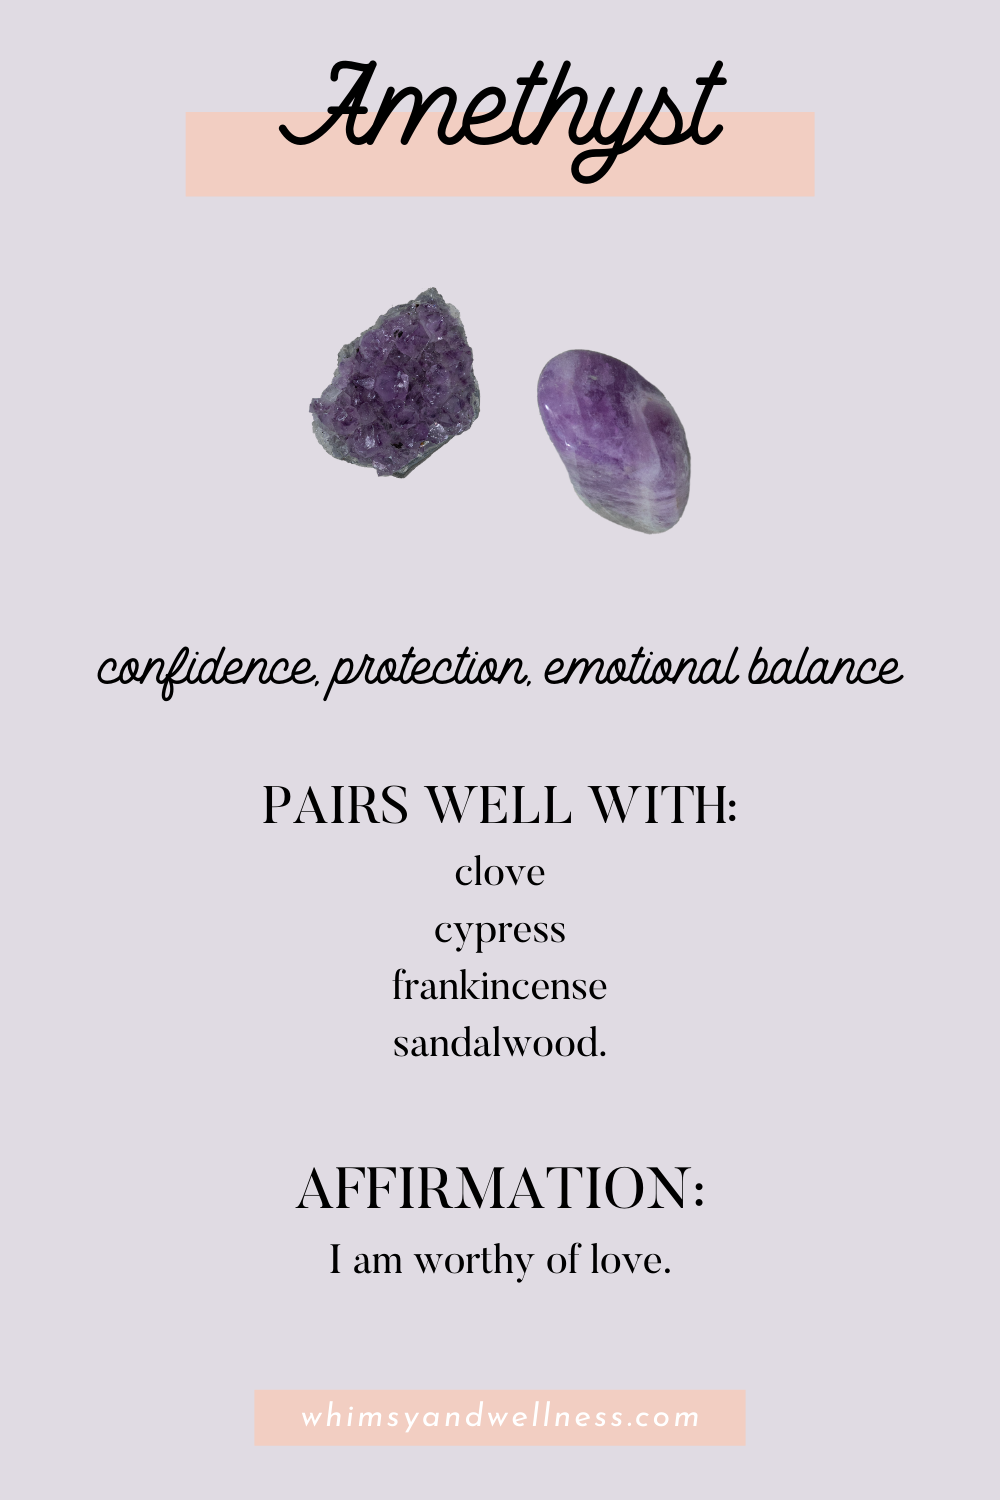 12 Pocket-Sized Crystals to Carry with you - Whimsy + Wellness